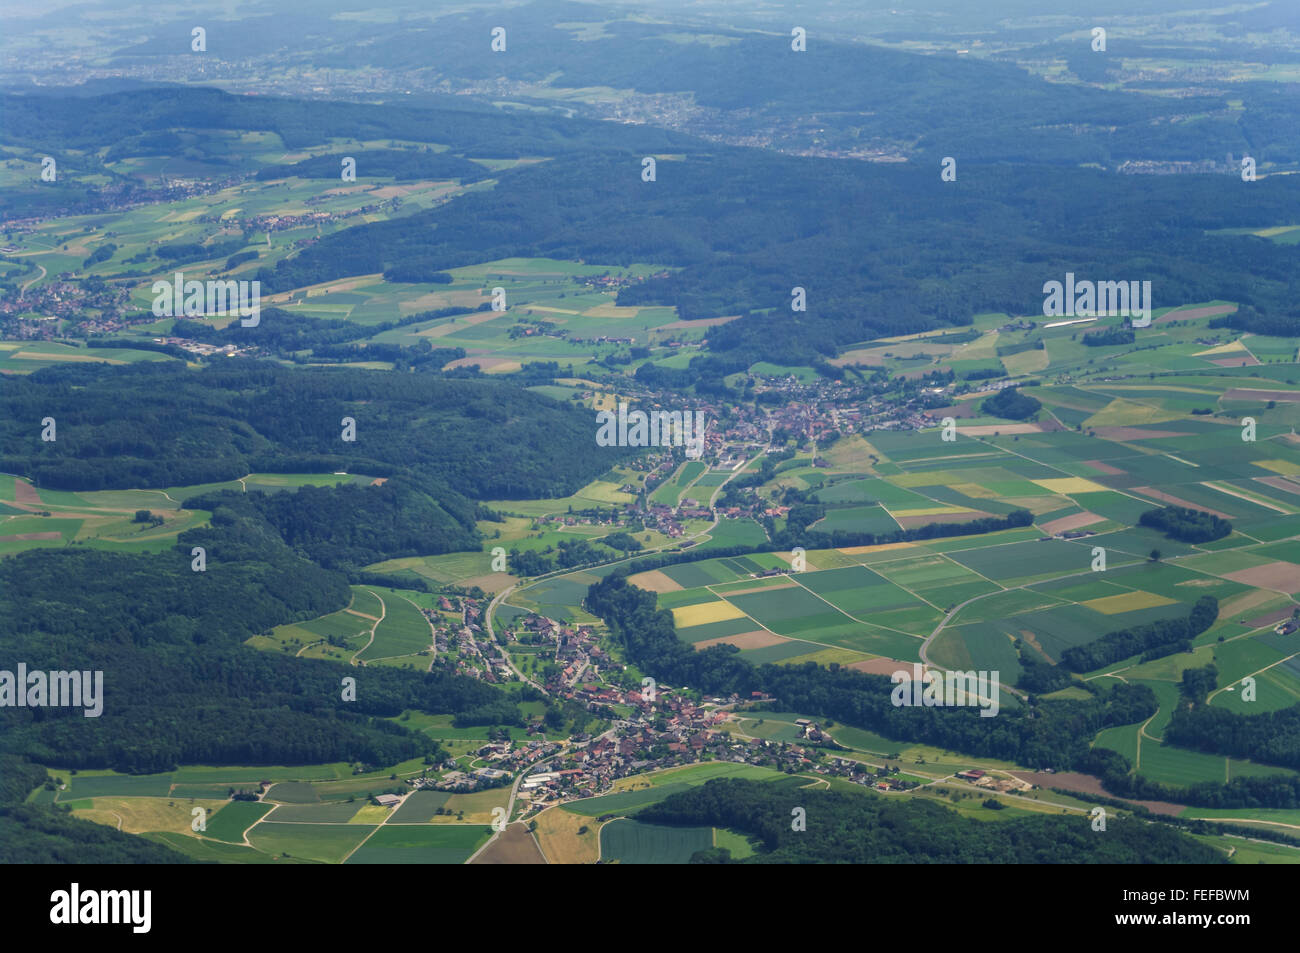 Aerial photography of Surbtal valley in Aargau, Switzerland, with the villages of Tegerfelden (front) and Endingen (center). Stock Photo